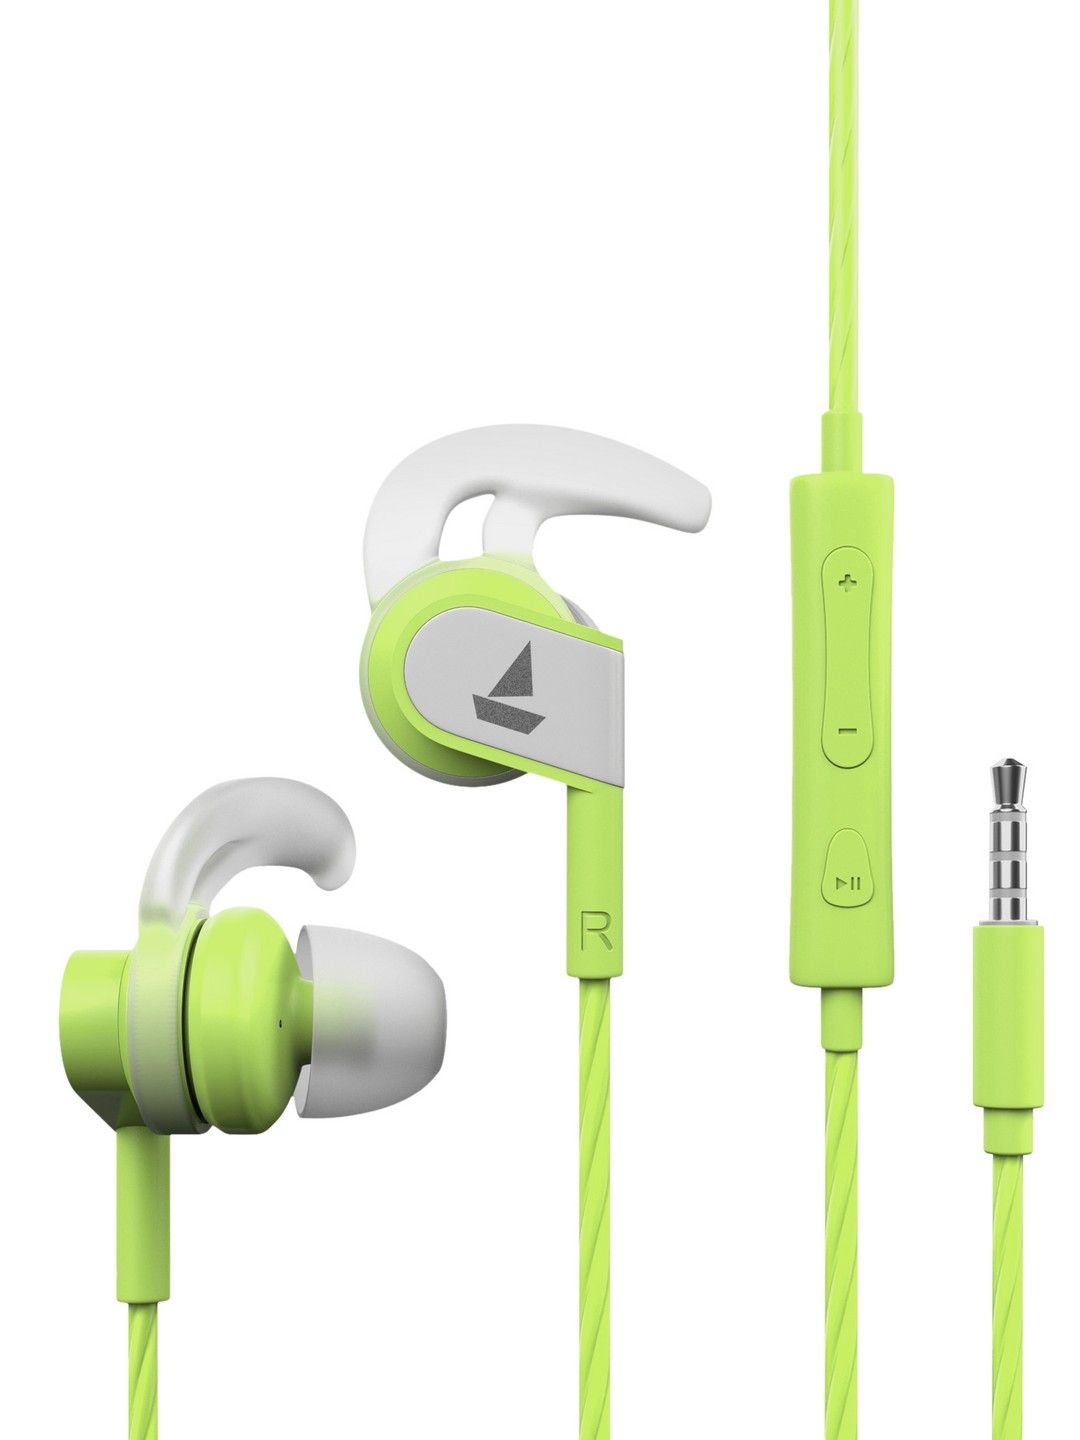 boAt BassHeads 242 Lime Wired Earphones with Sports Fit Stretch Resistance & IPX4 Price in India